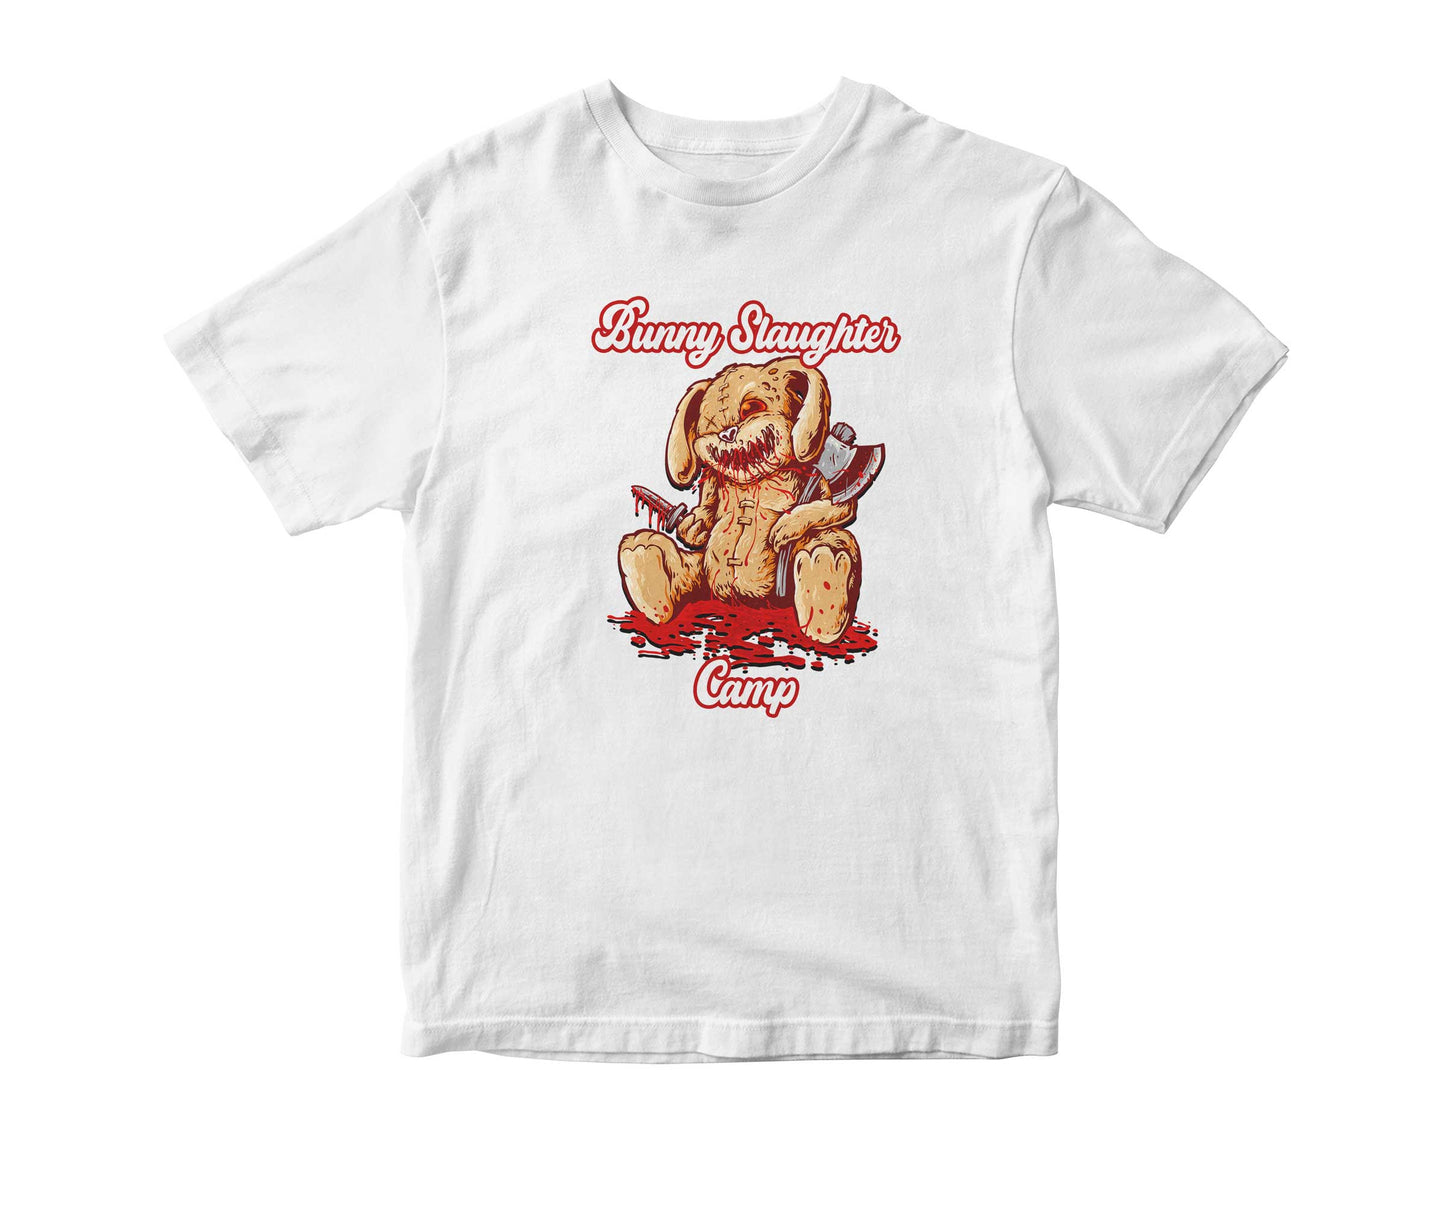 Bunny Slaughter Camp Edition Adult Unisex T-Shirt